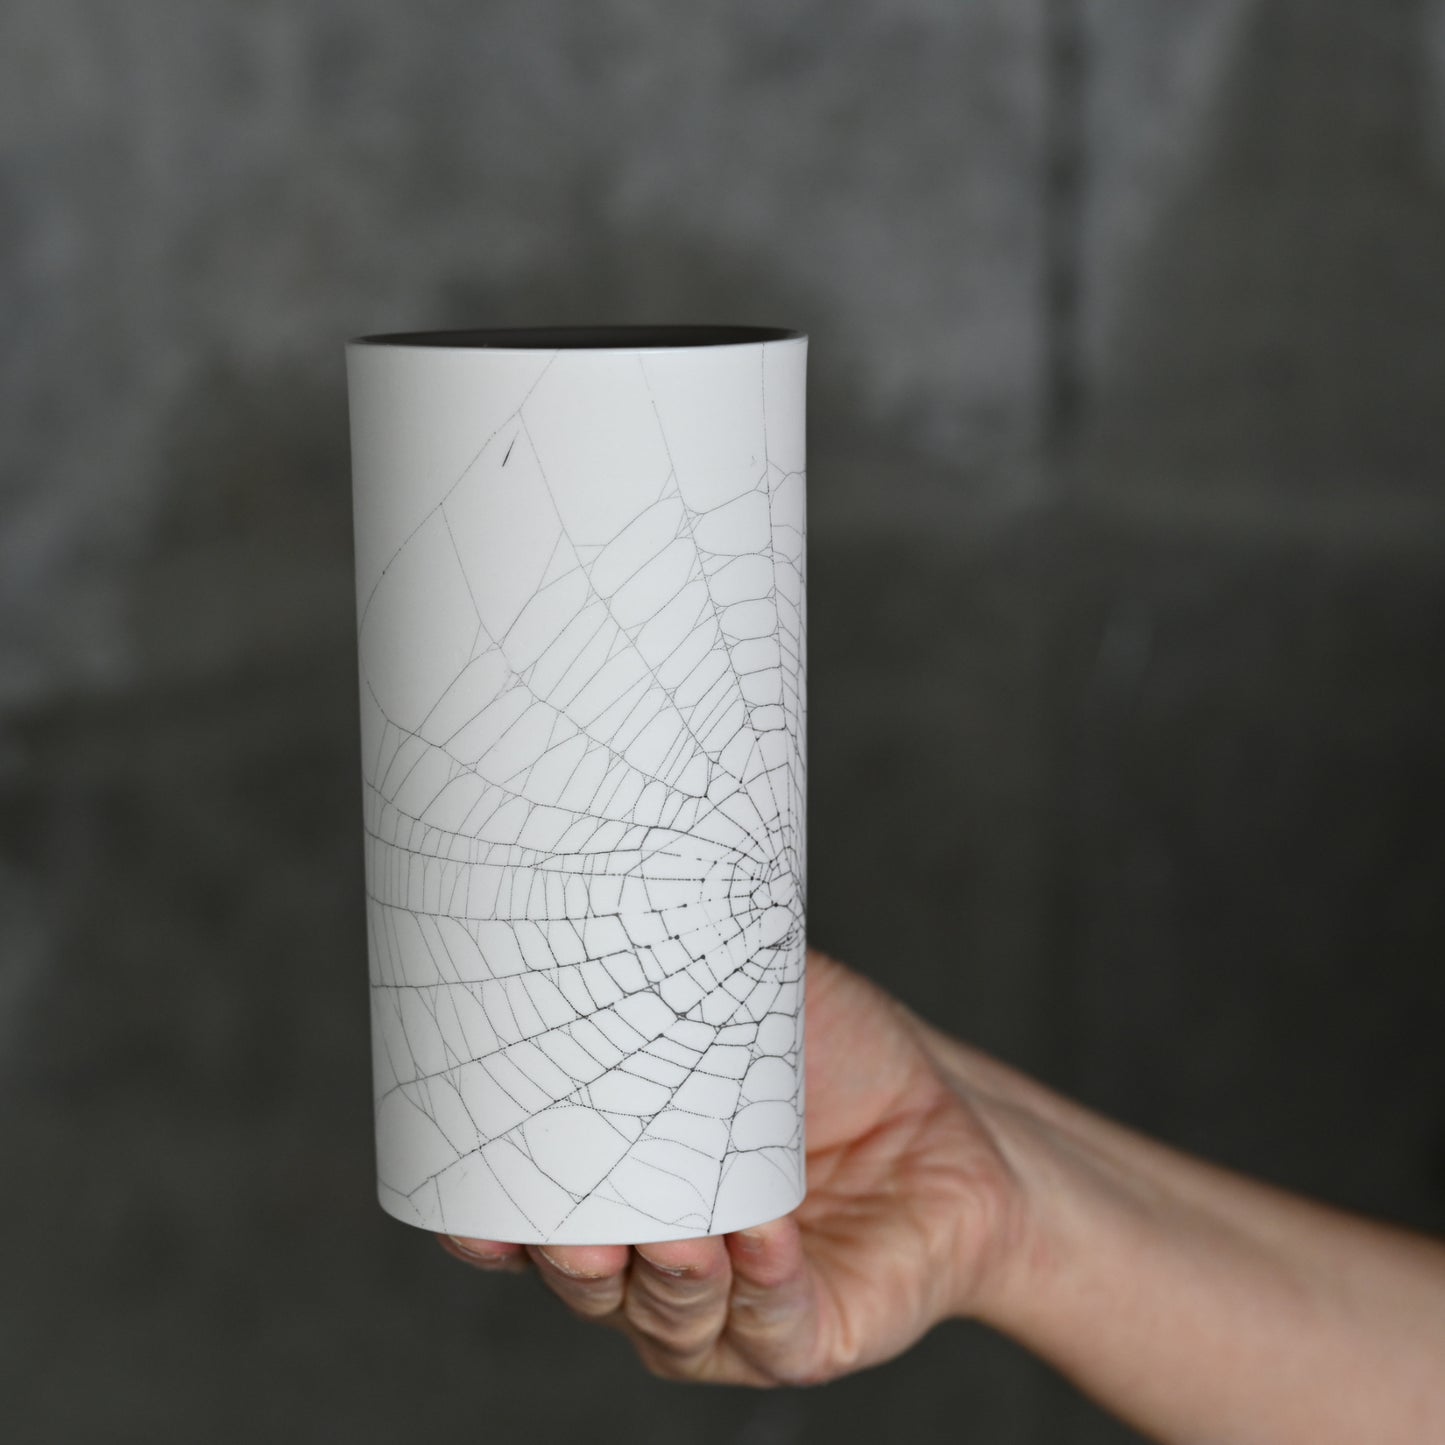 Web on Clay (177), Collected September 17, 2022